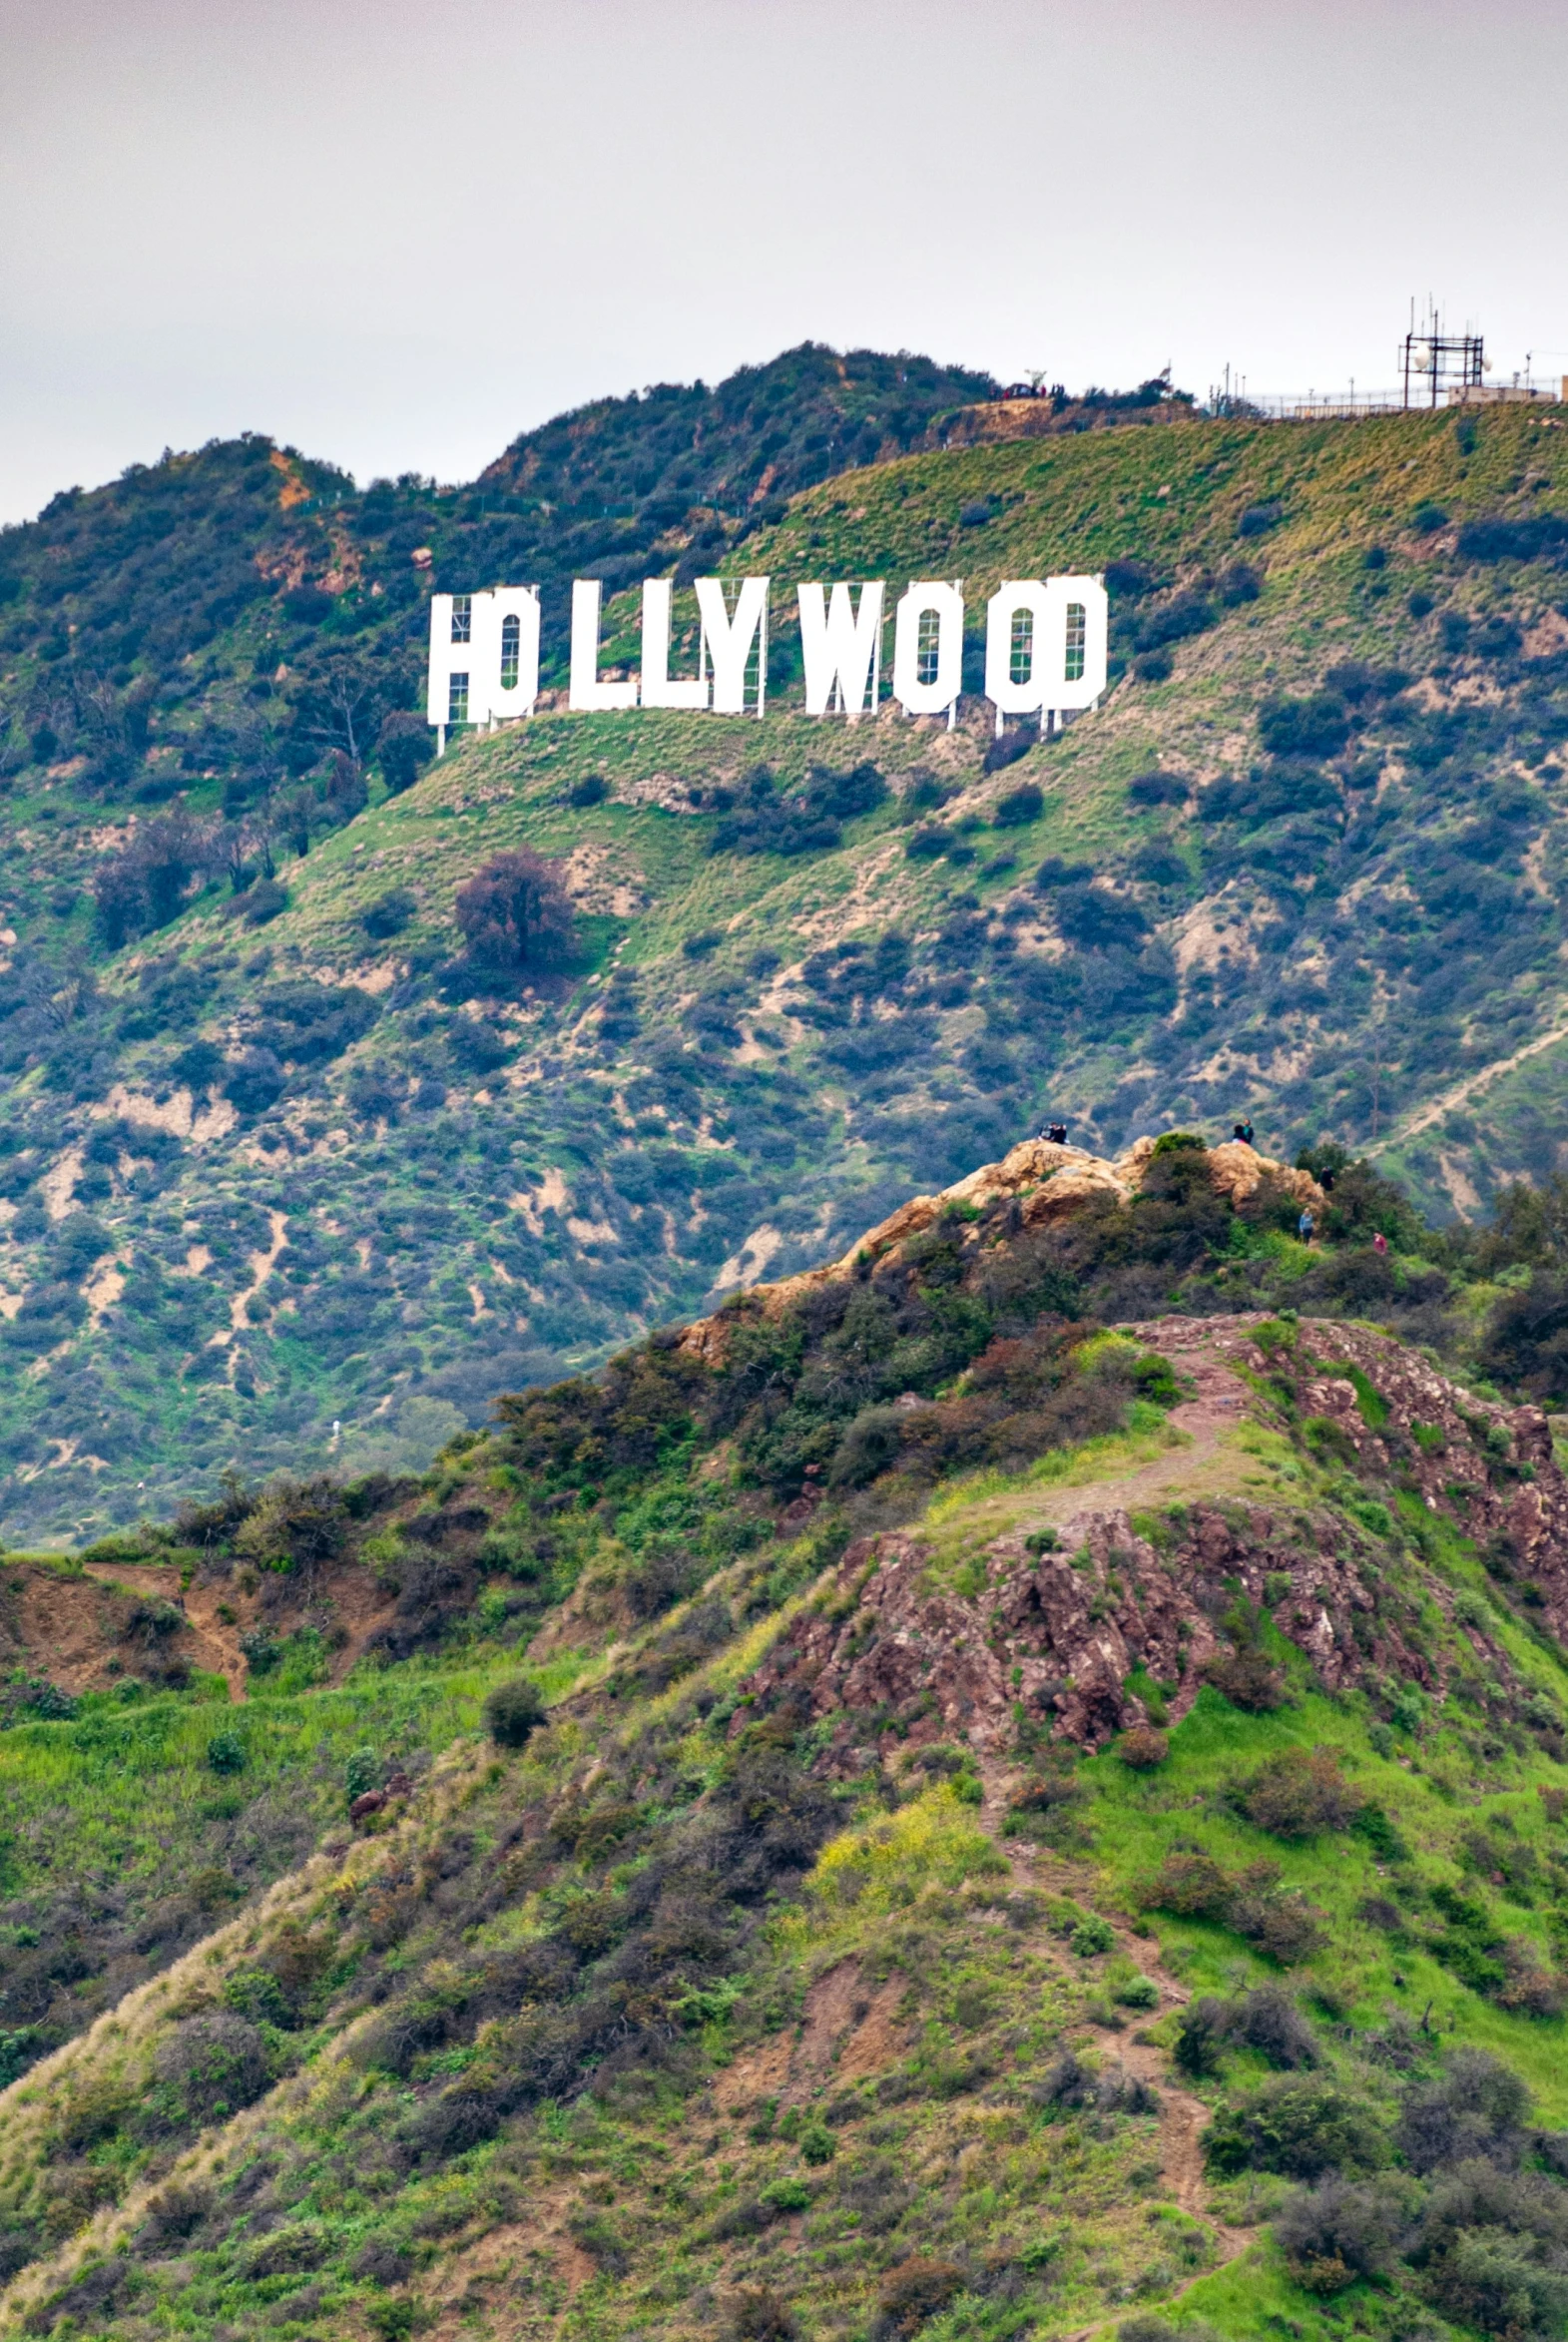 the hollywood sign atop the hill above some trees